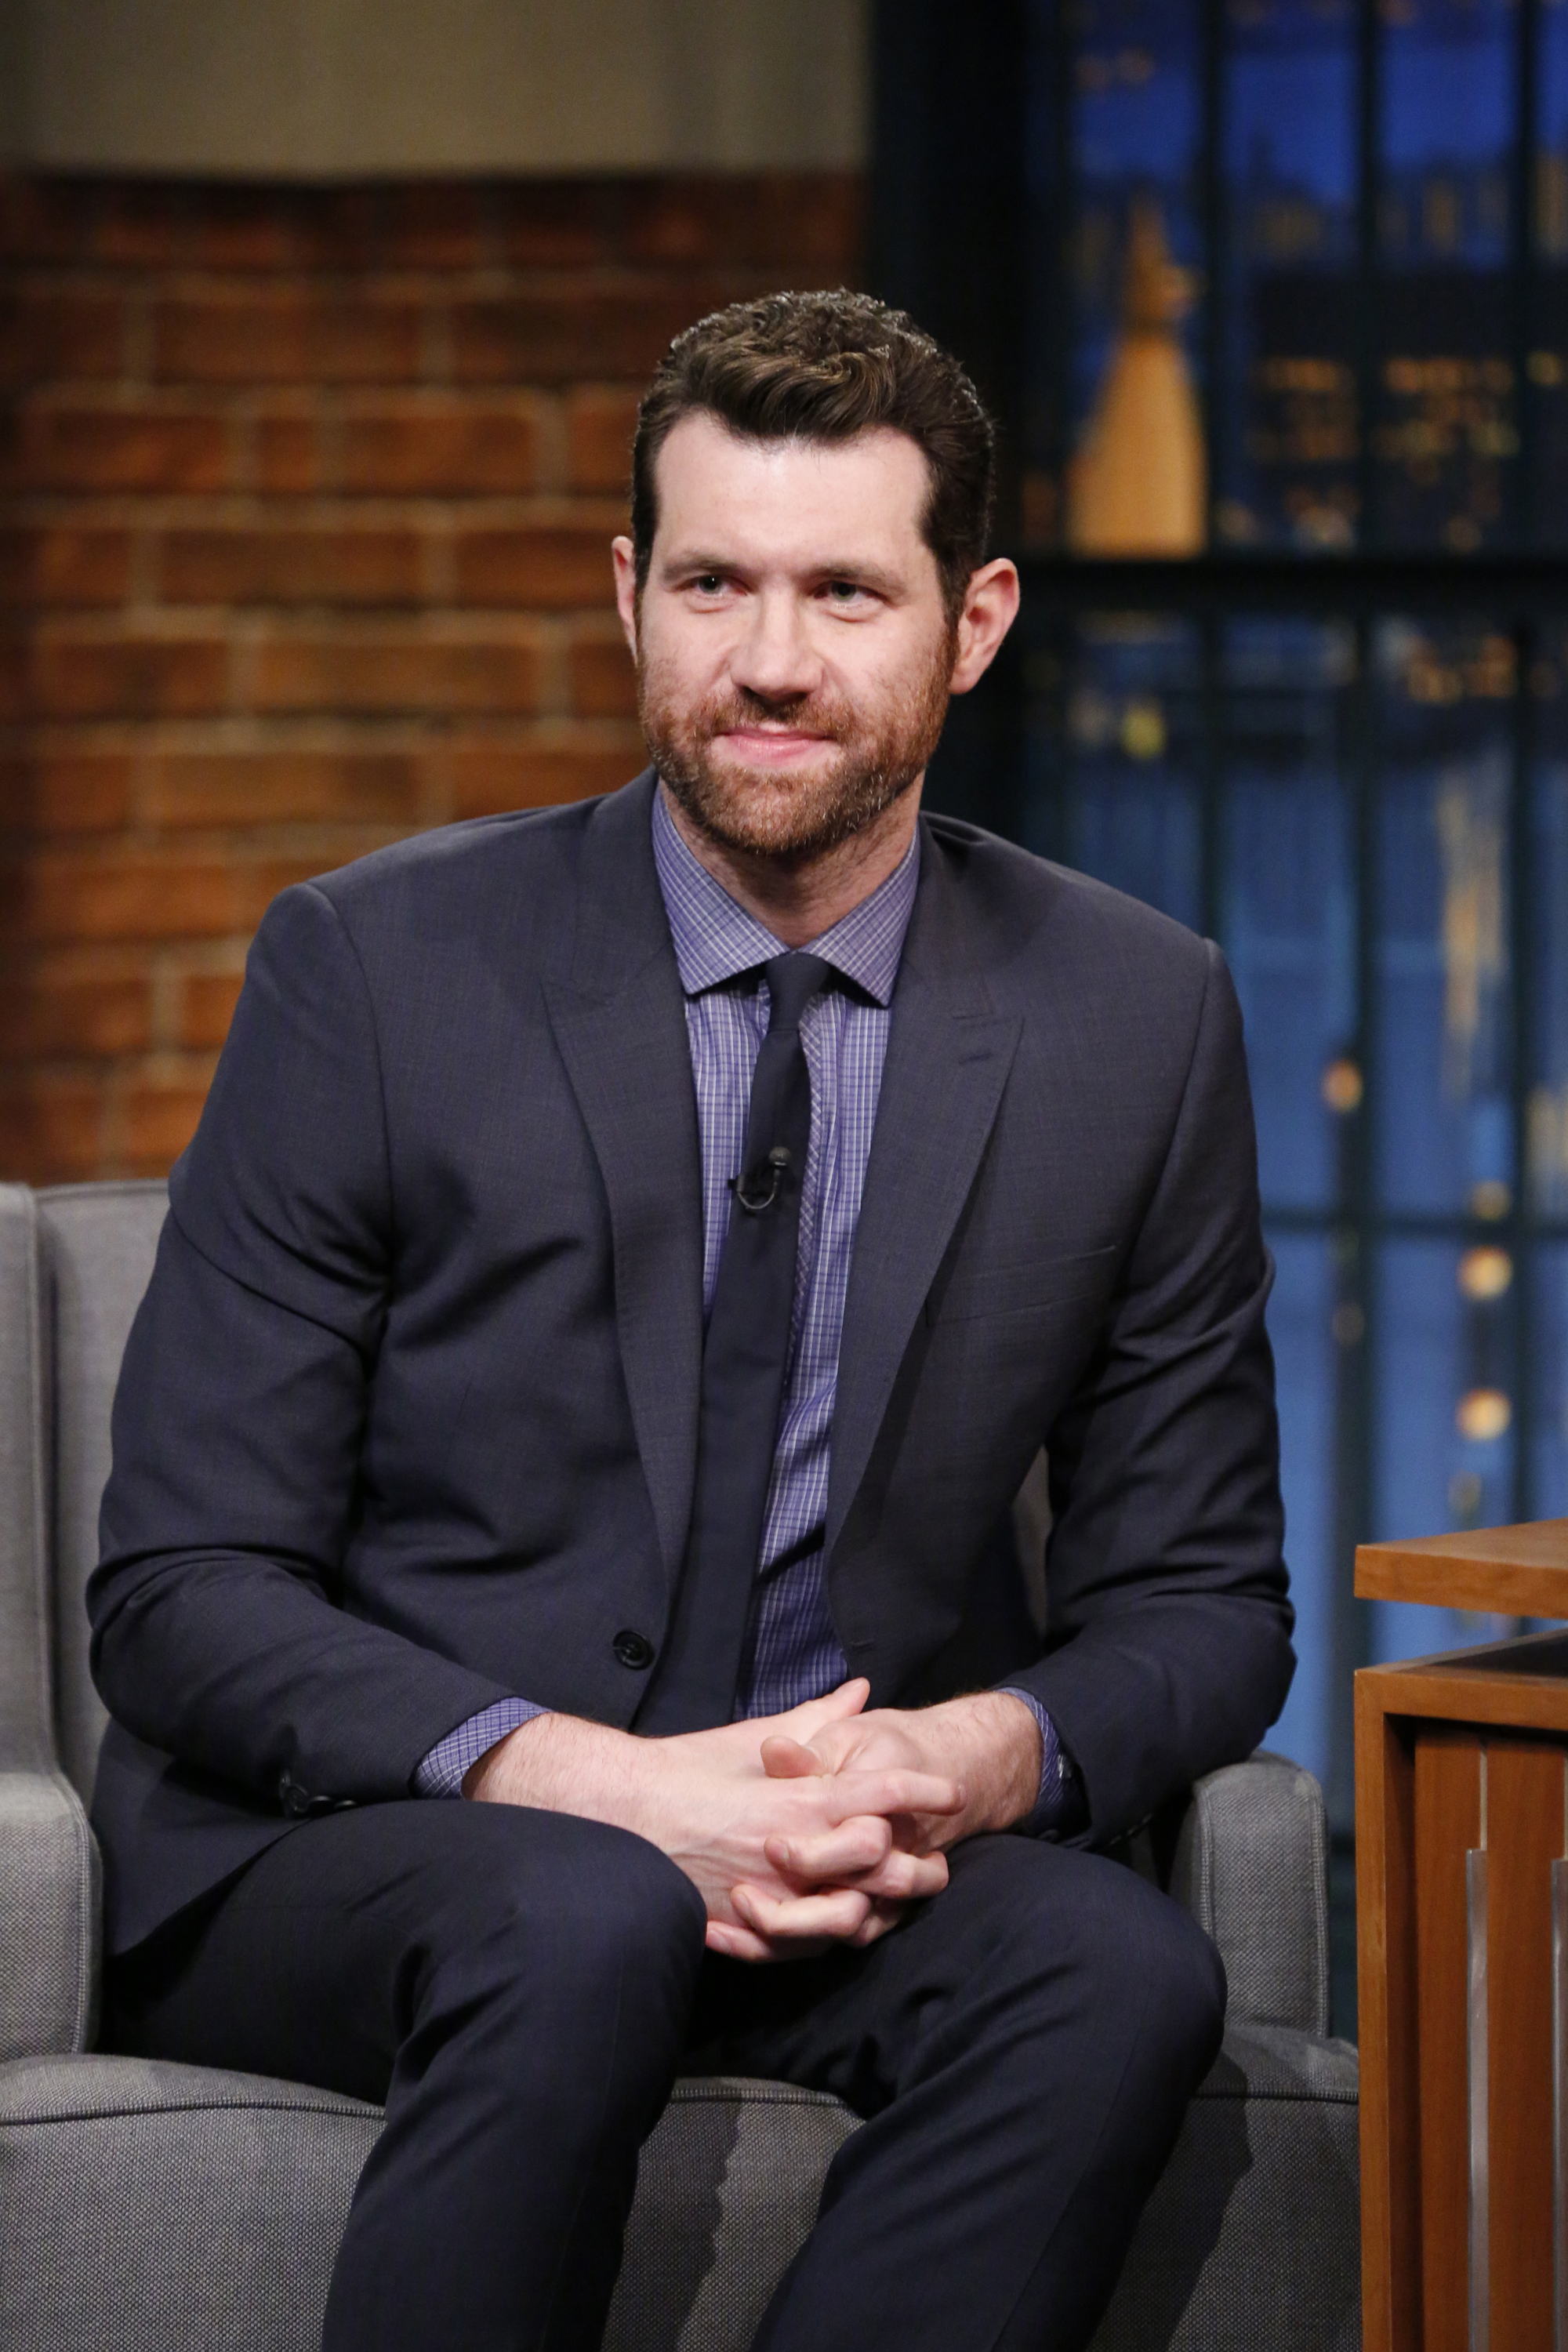 Billy Eichner during "Late Night with Seth Meyers" on June 20, 2016.